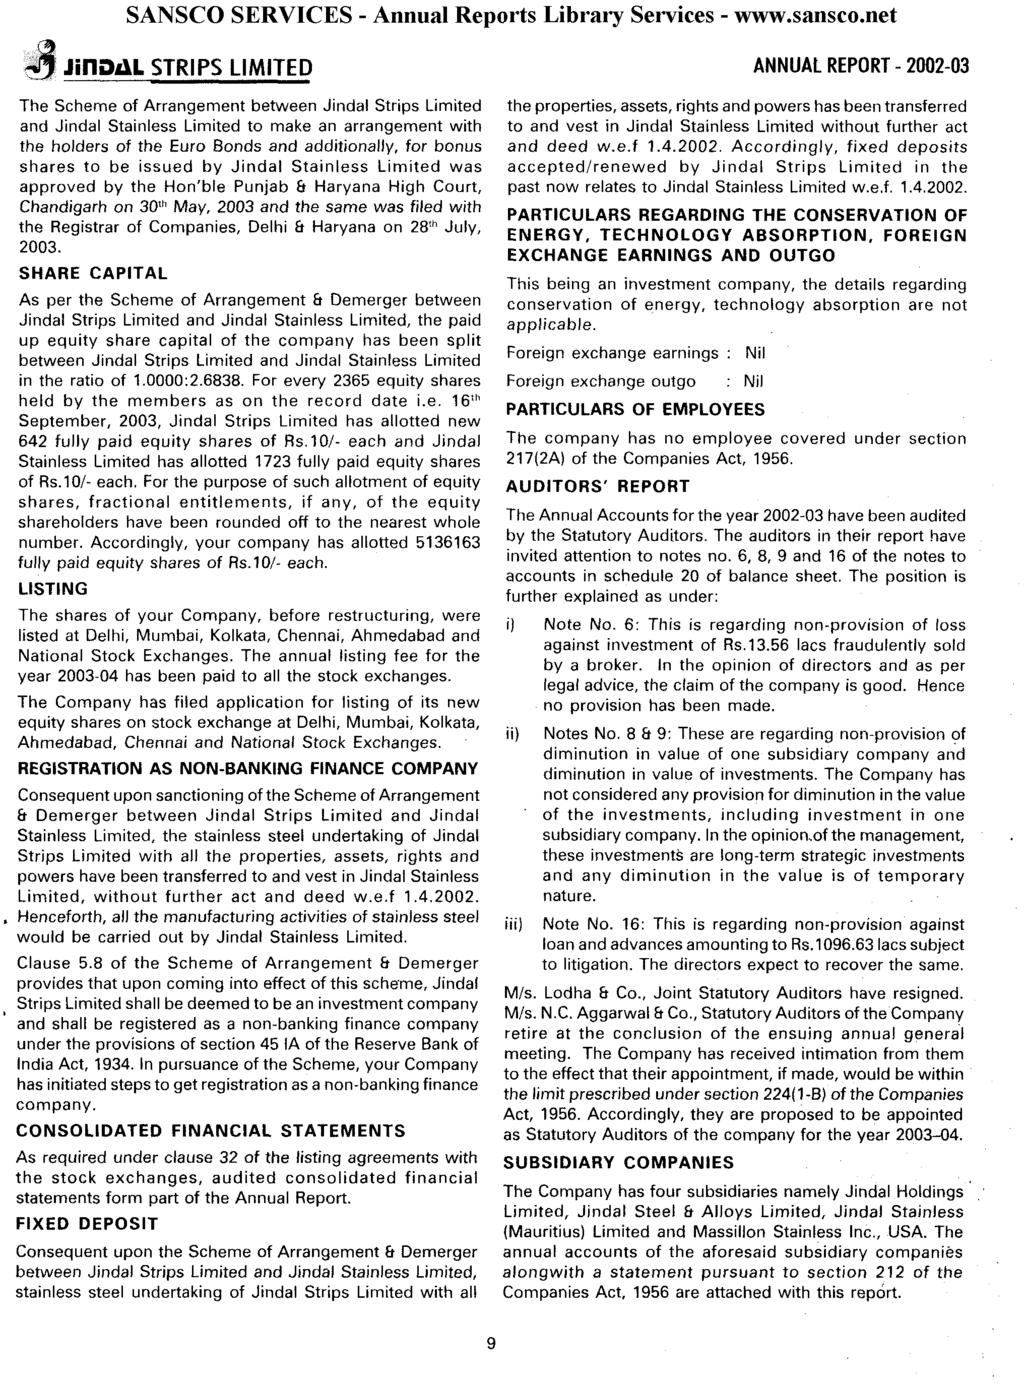 JiflDAL STRIPS LIMITED ANNUAL REPORT - 2002-03 The Scheme of Arrangement between Jindal Strips Limited and Jindal Stainless Limited to make an arrangement with the holders of the Euro Bonds and